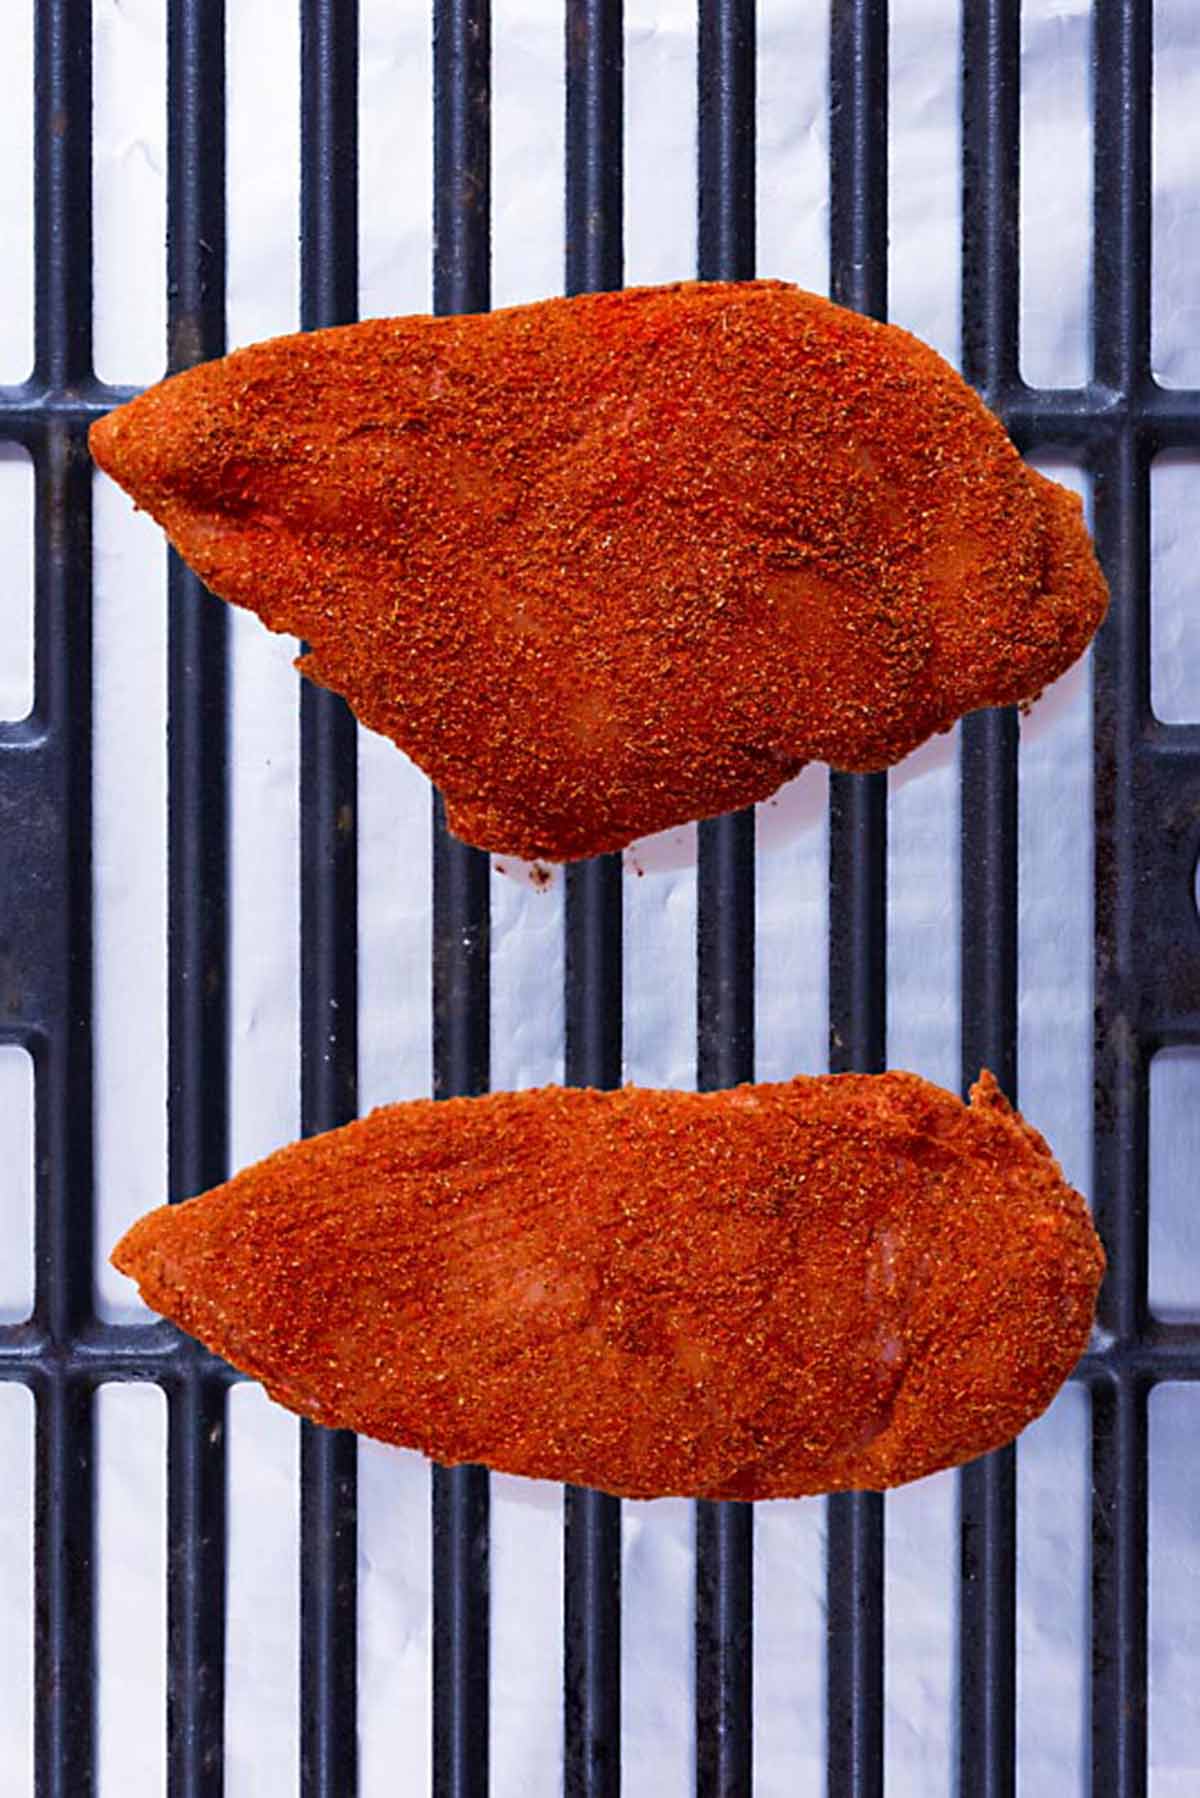 A barbecue grill with two seasoned chicken breasts on it.